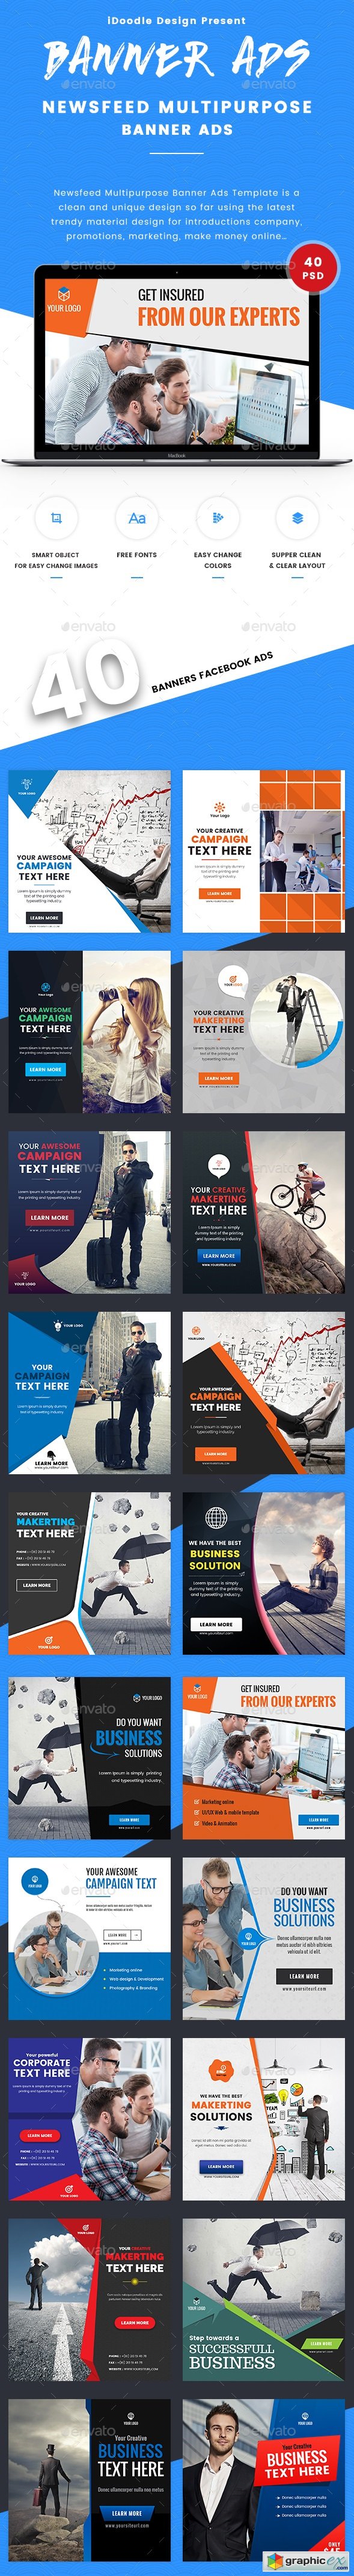 Newsfeed Multipurpose Banner Ads - 40 PSD [02 Size Each]